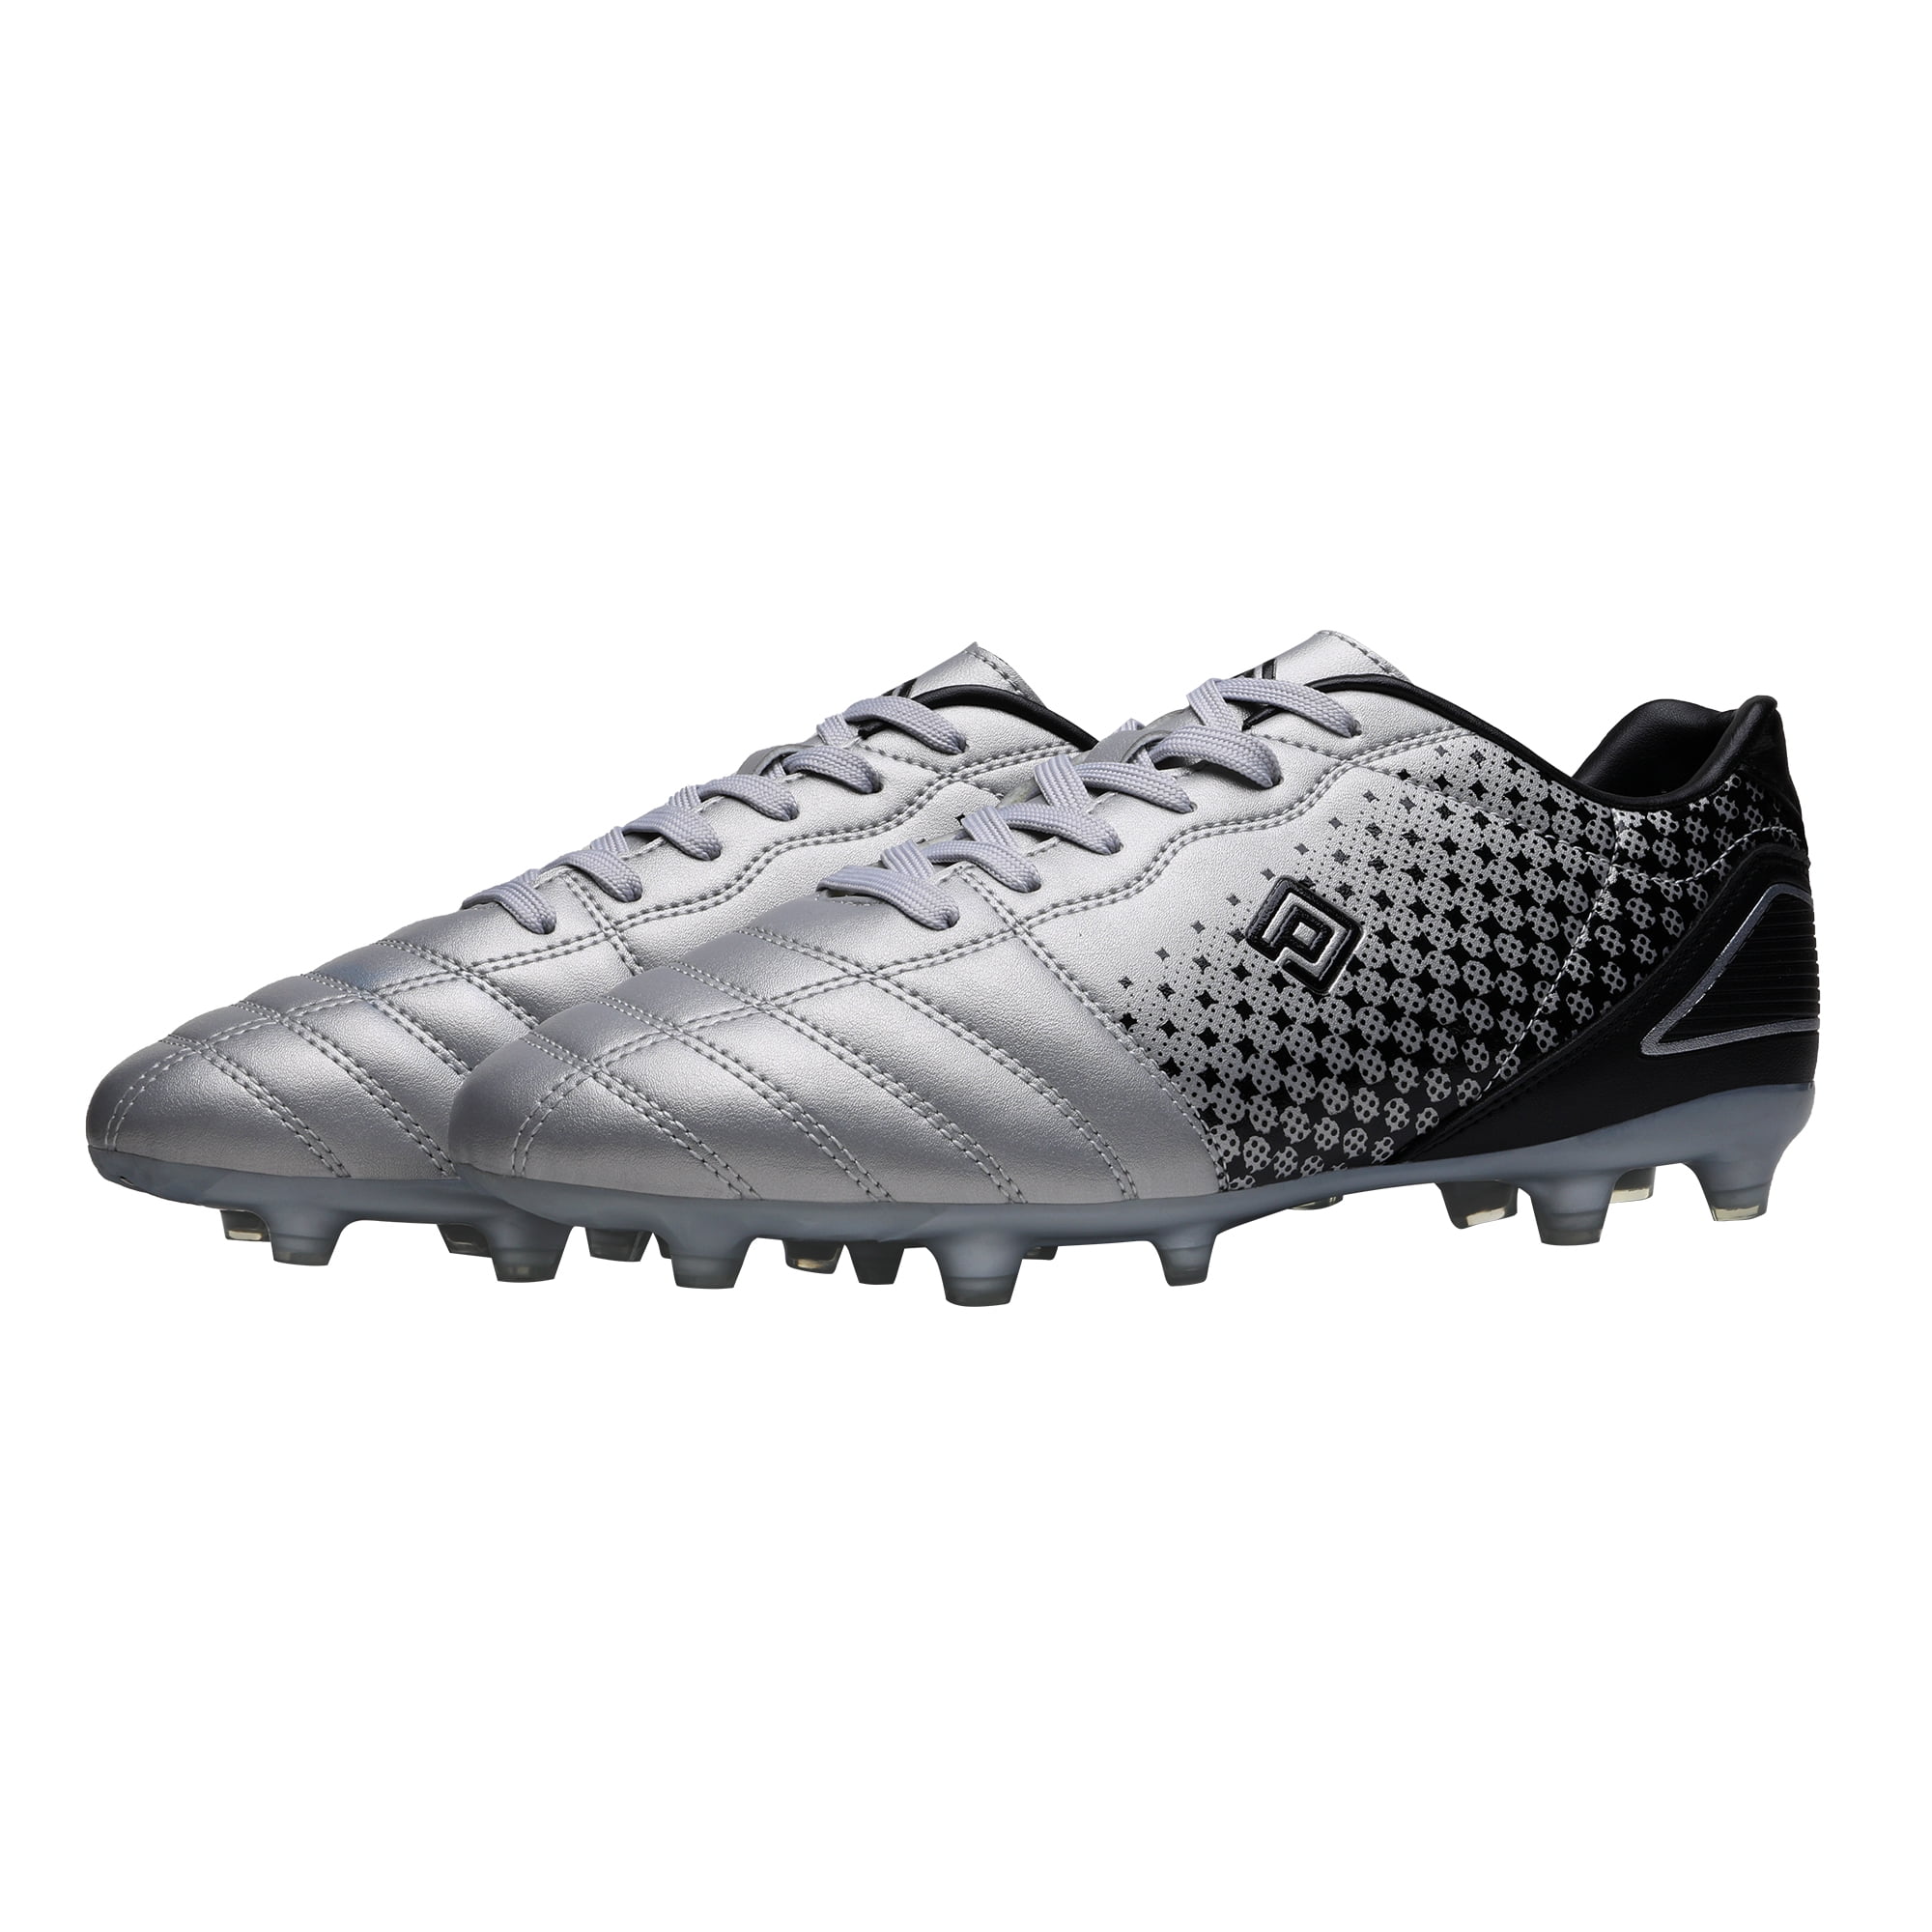 DREAM PAIRS Men's Firm Ground Soccer Cleats Soccer Shoes 